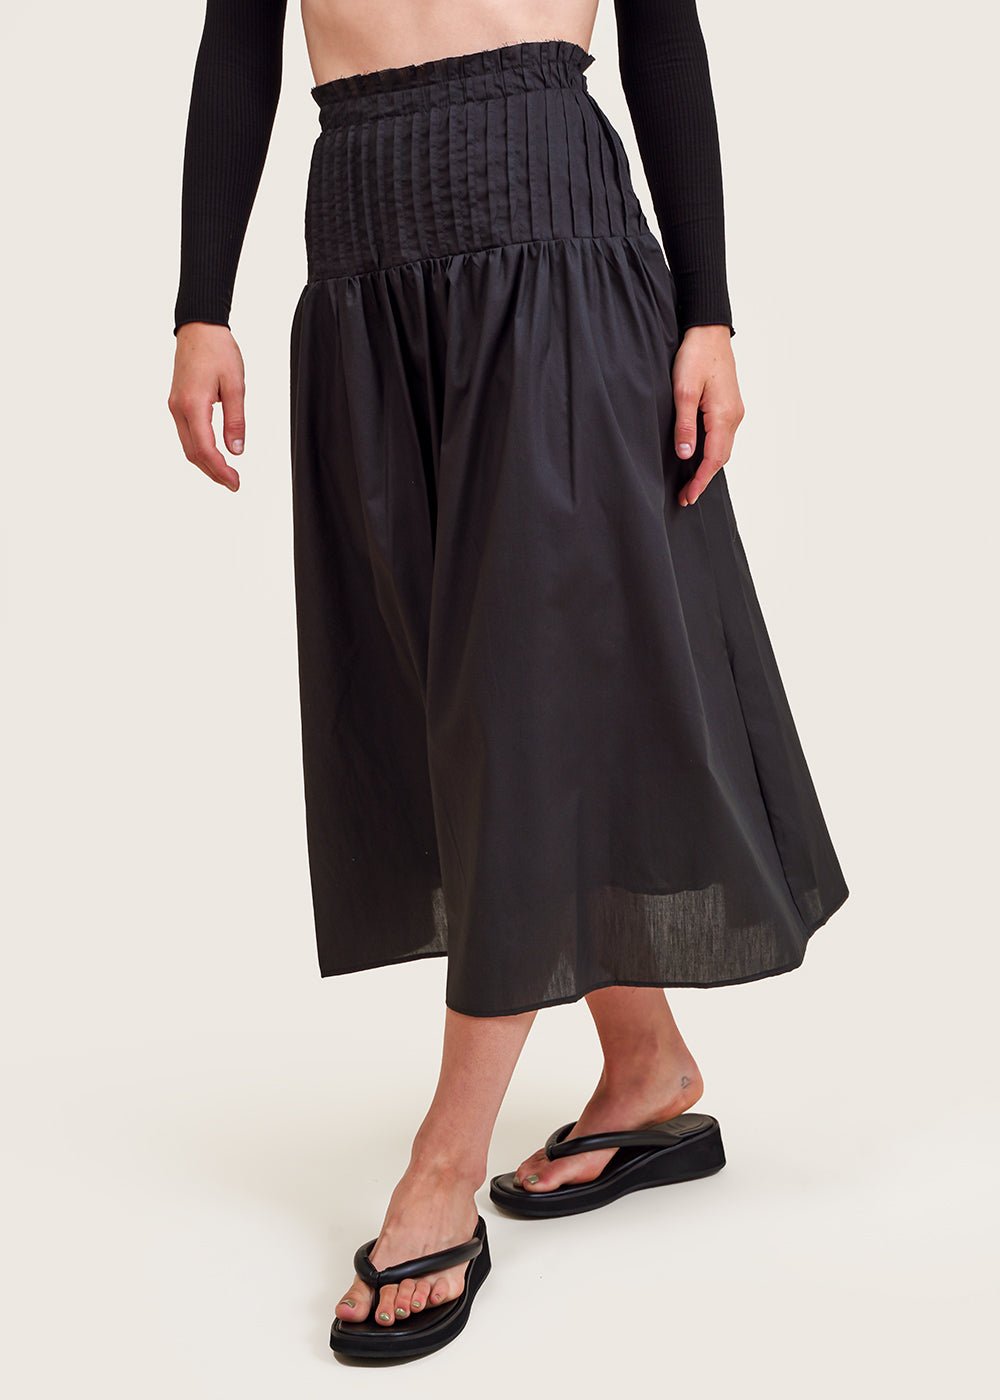 Angie Bauer Black Tucked Drop Waist Skirt - New Classics Studios Sustainable Ethical Fashion Canada